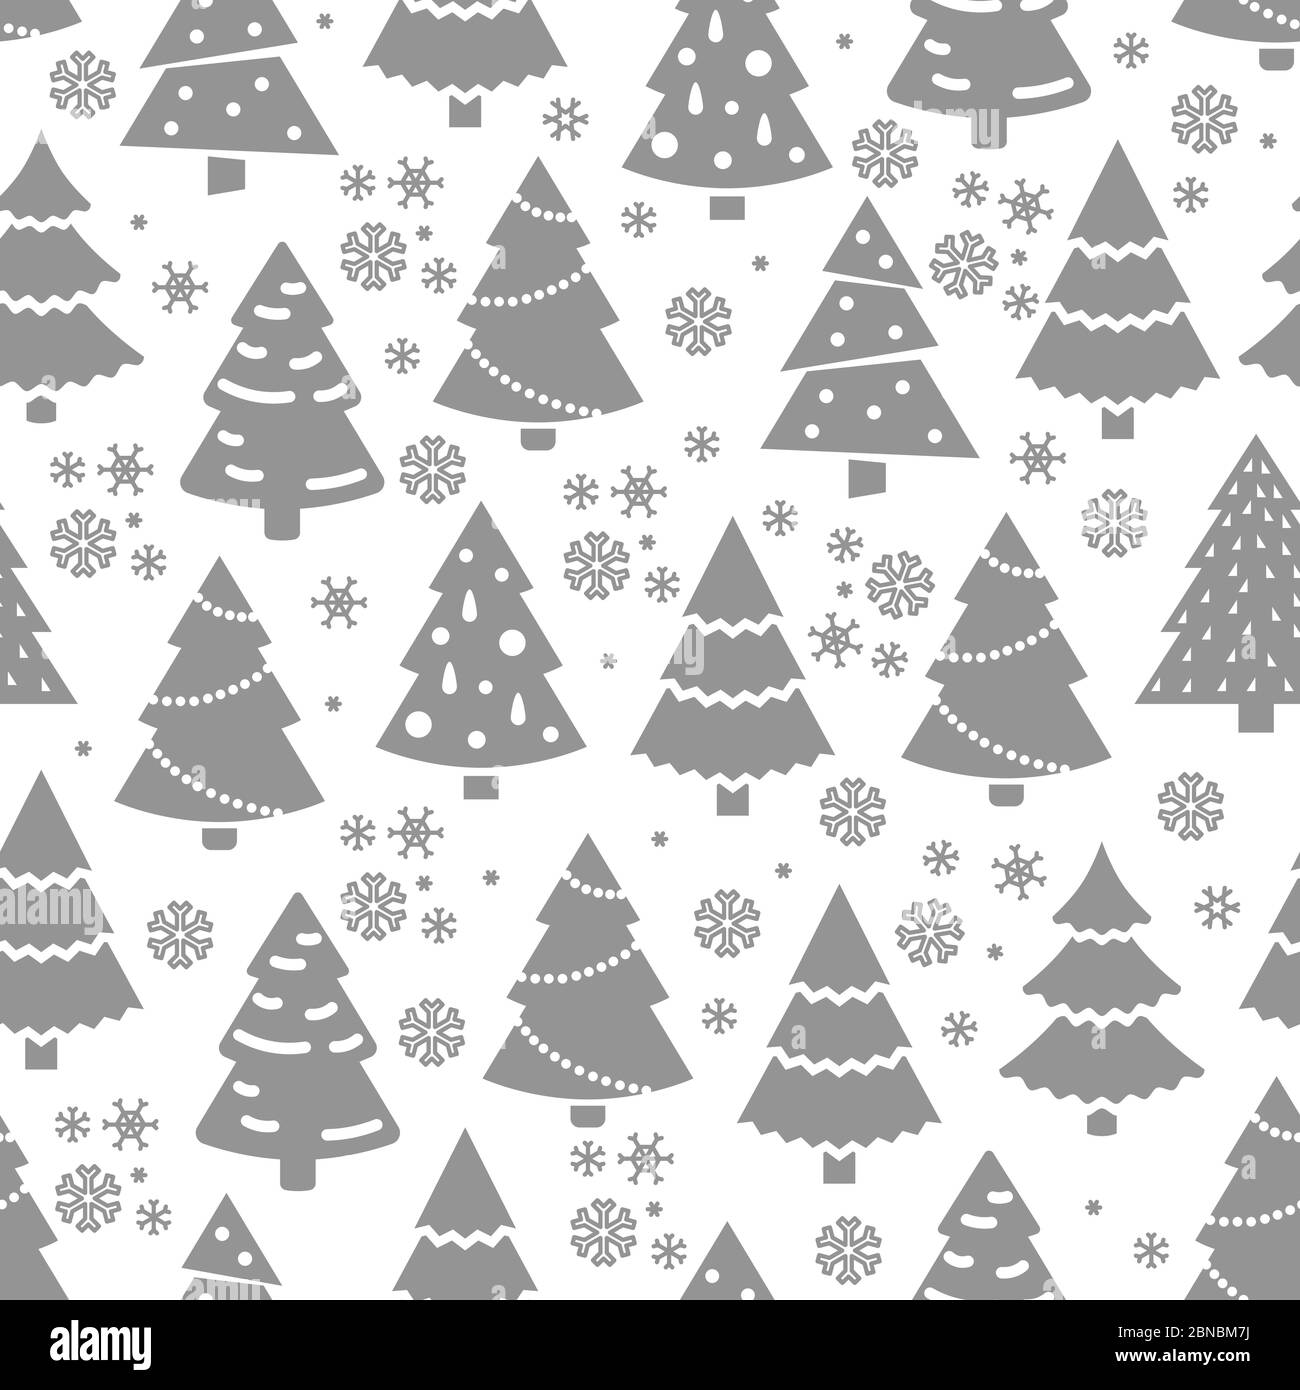 Abstract Christmas tree seamless pattern. Winter seamless texture with fir tree and snowflakes. Illustration of tree pattern christmas vector Stock Vector